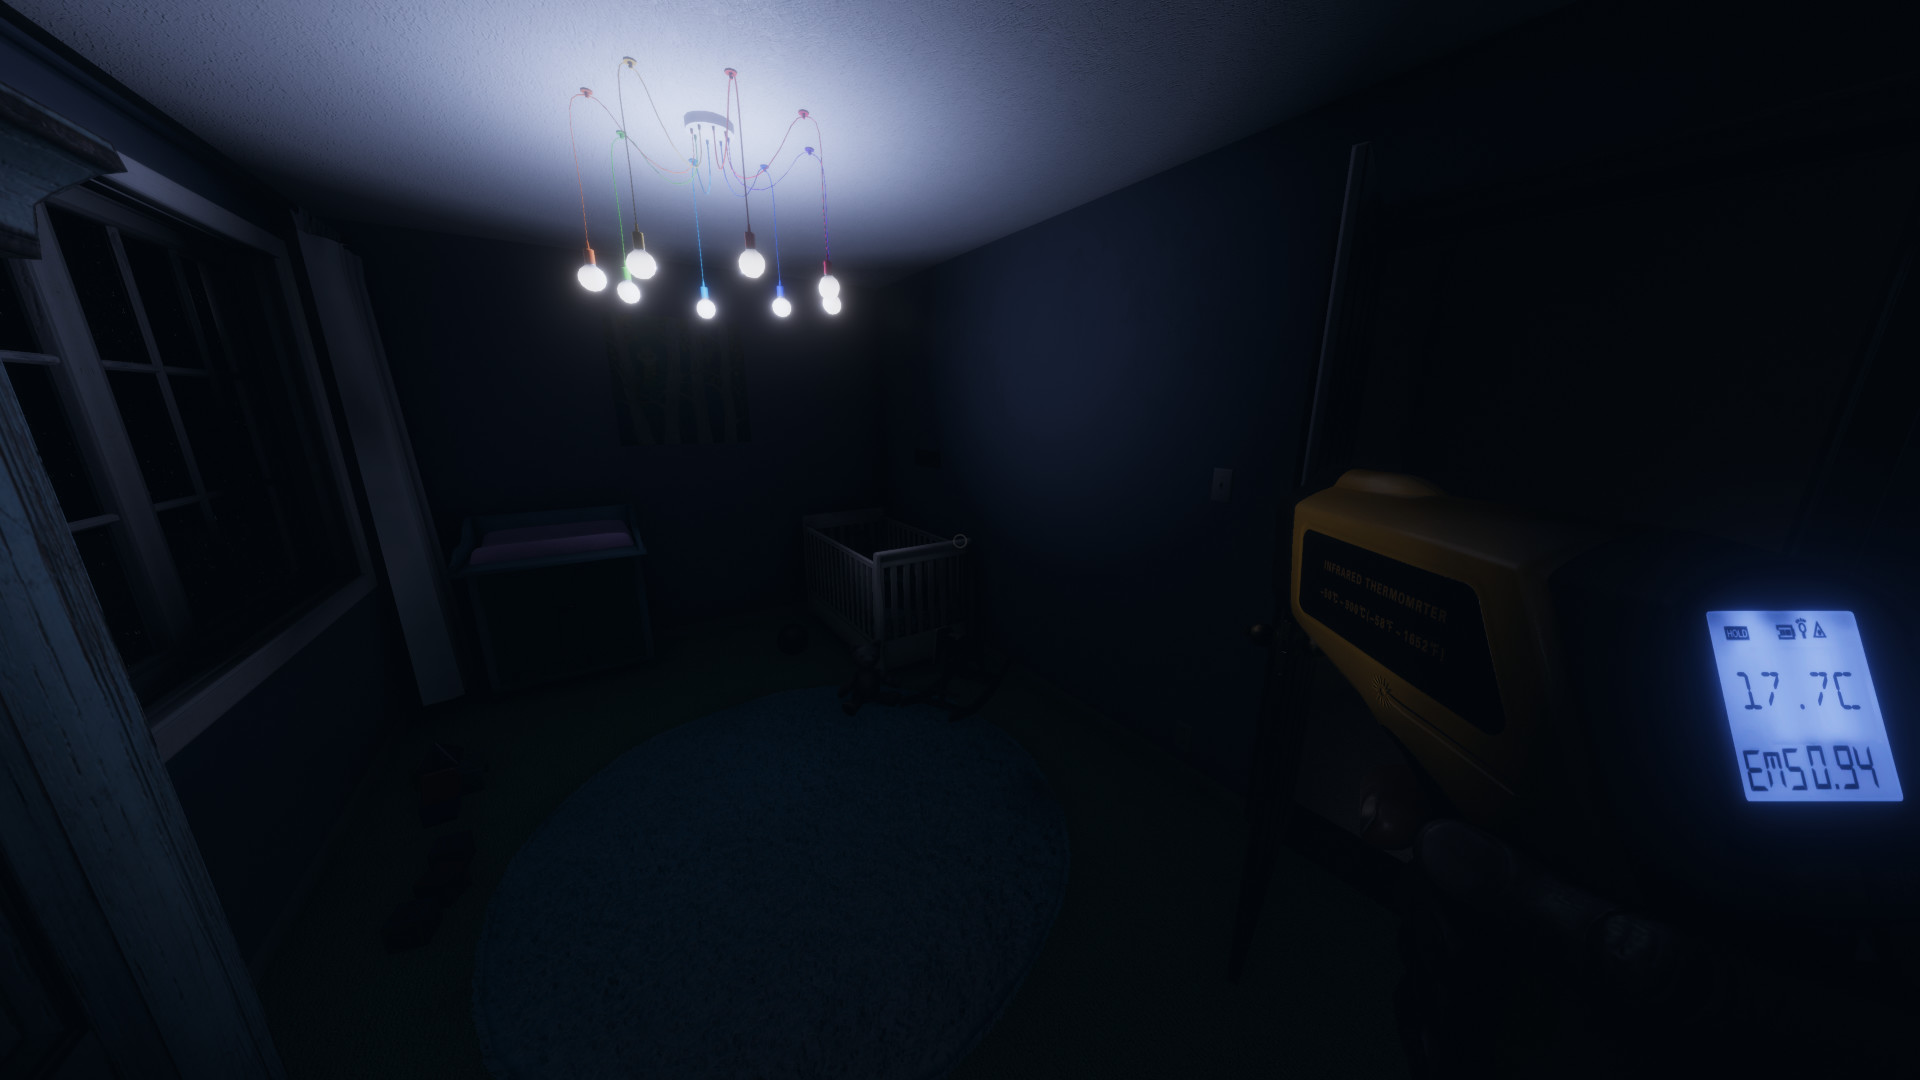 A screenshot from the video game Phasmophobia in a dark bedroom with a light fixture on the ceiling while the character reads the temperature of the room with a thermometer gun that reads out 17.7 degrees Celsius.